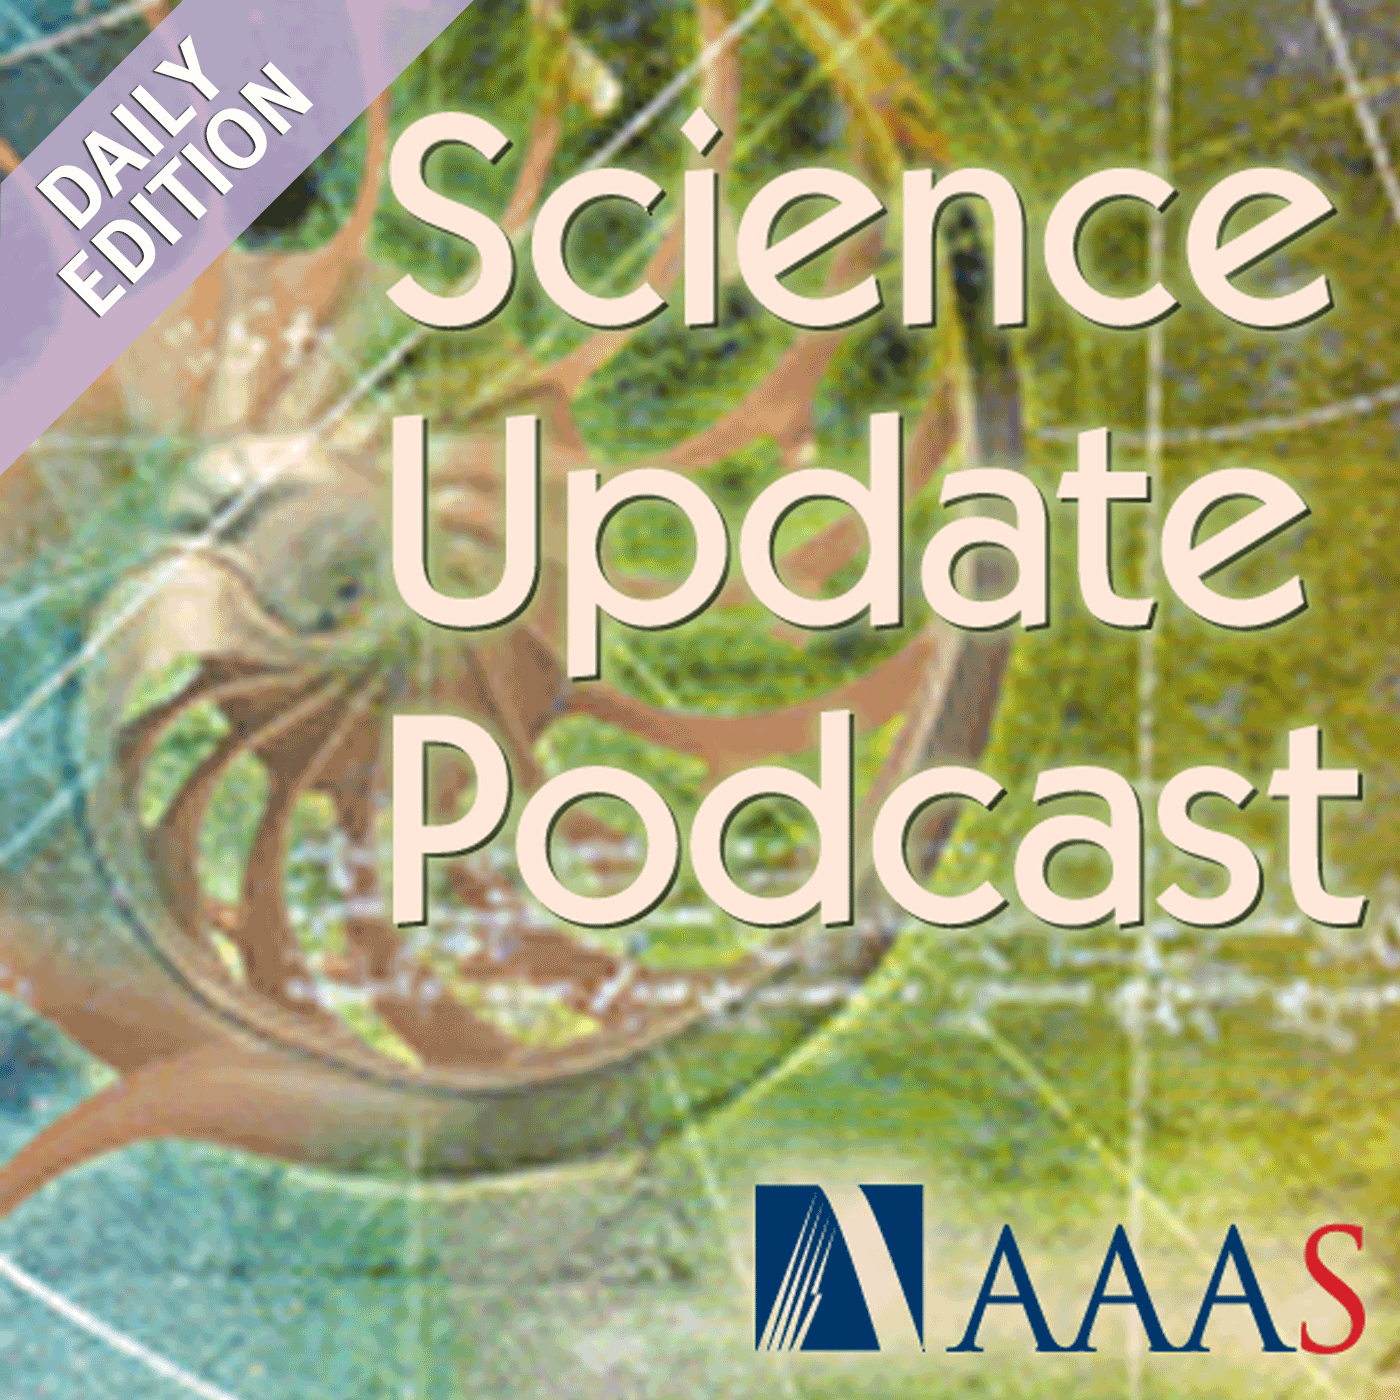 Science Update Podcast - Daily Edition